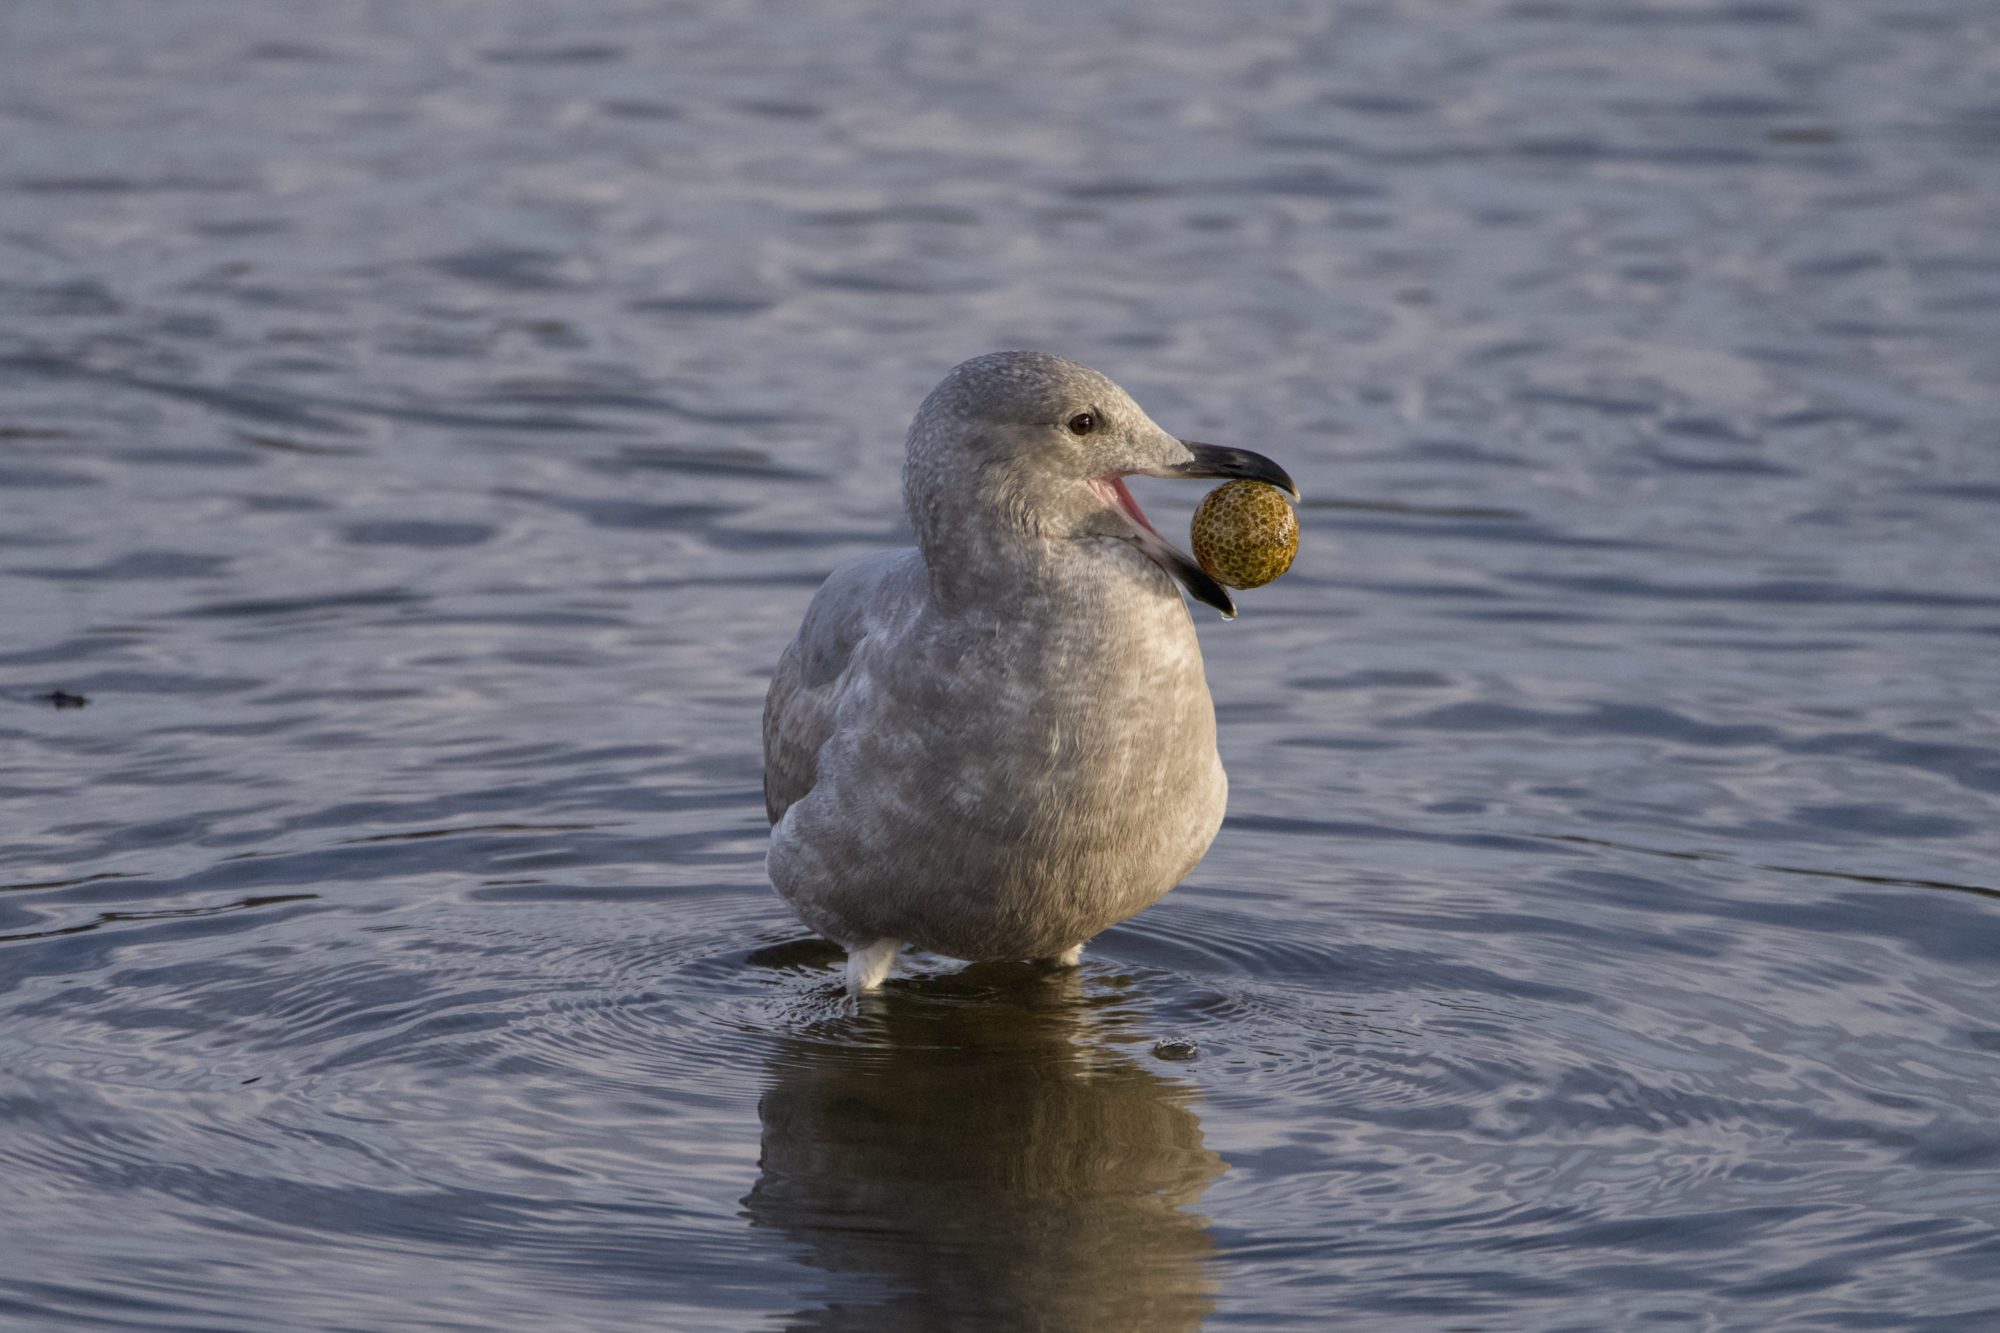 An immature Glaucous-winged Gull is standing belly deep in water and holding an old, stained golf ball in its bill